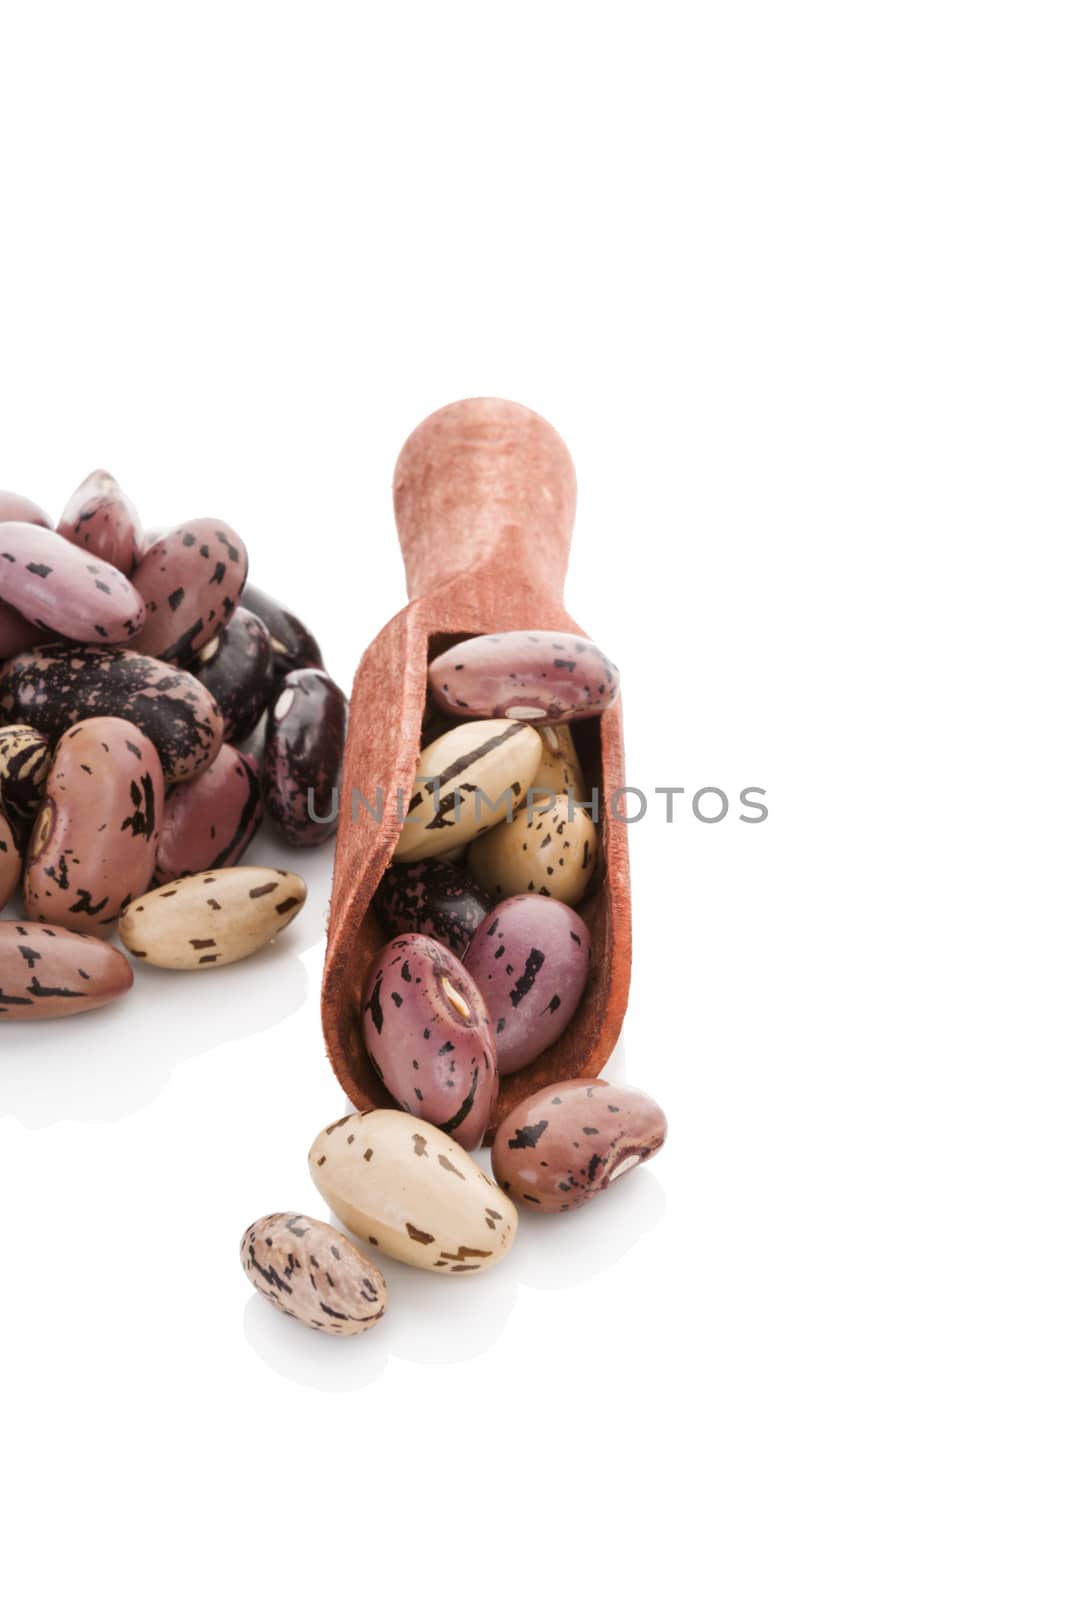 Pinto beans on wooden scoop isolated on white background. Healthy legume eating.